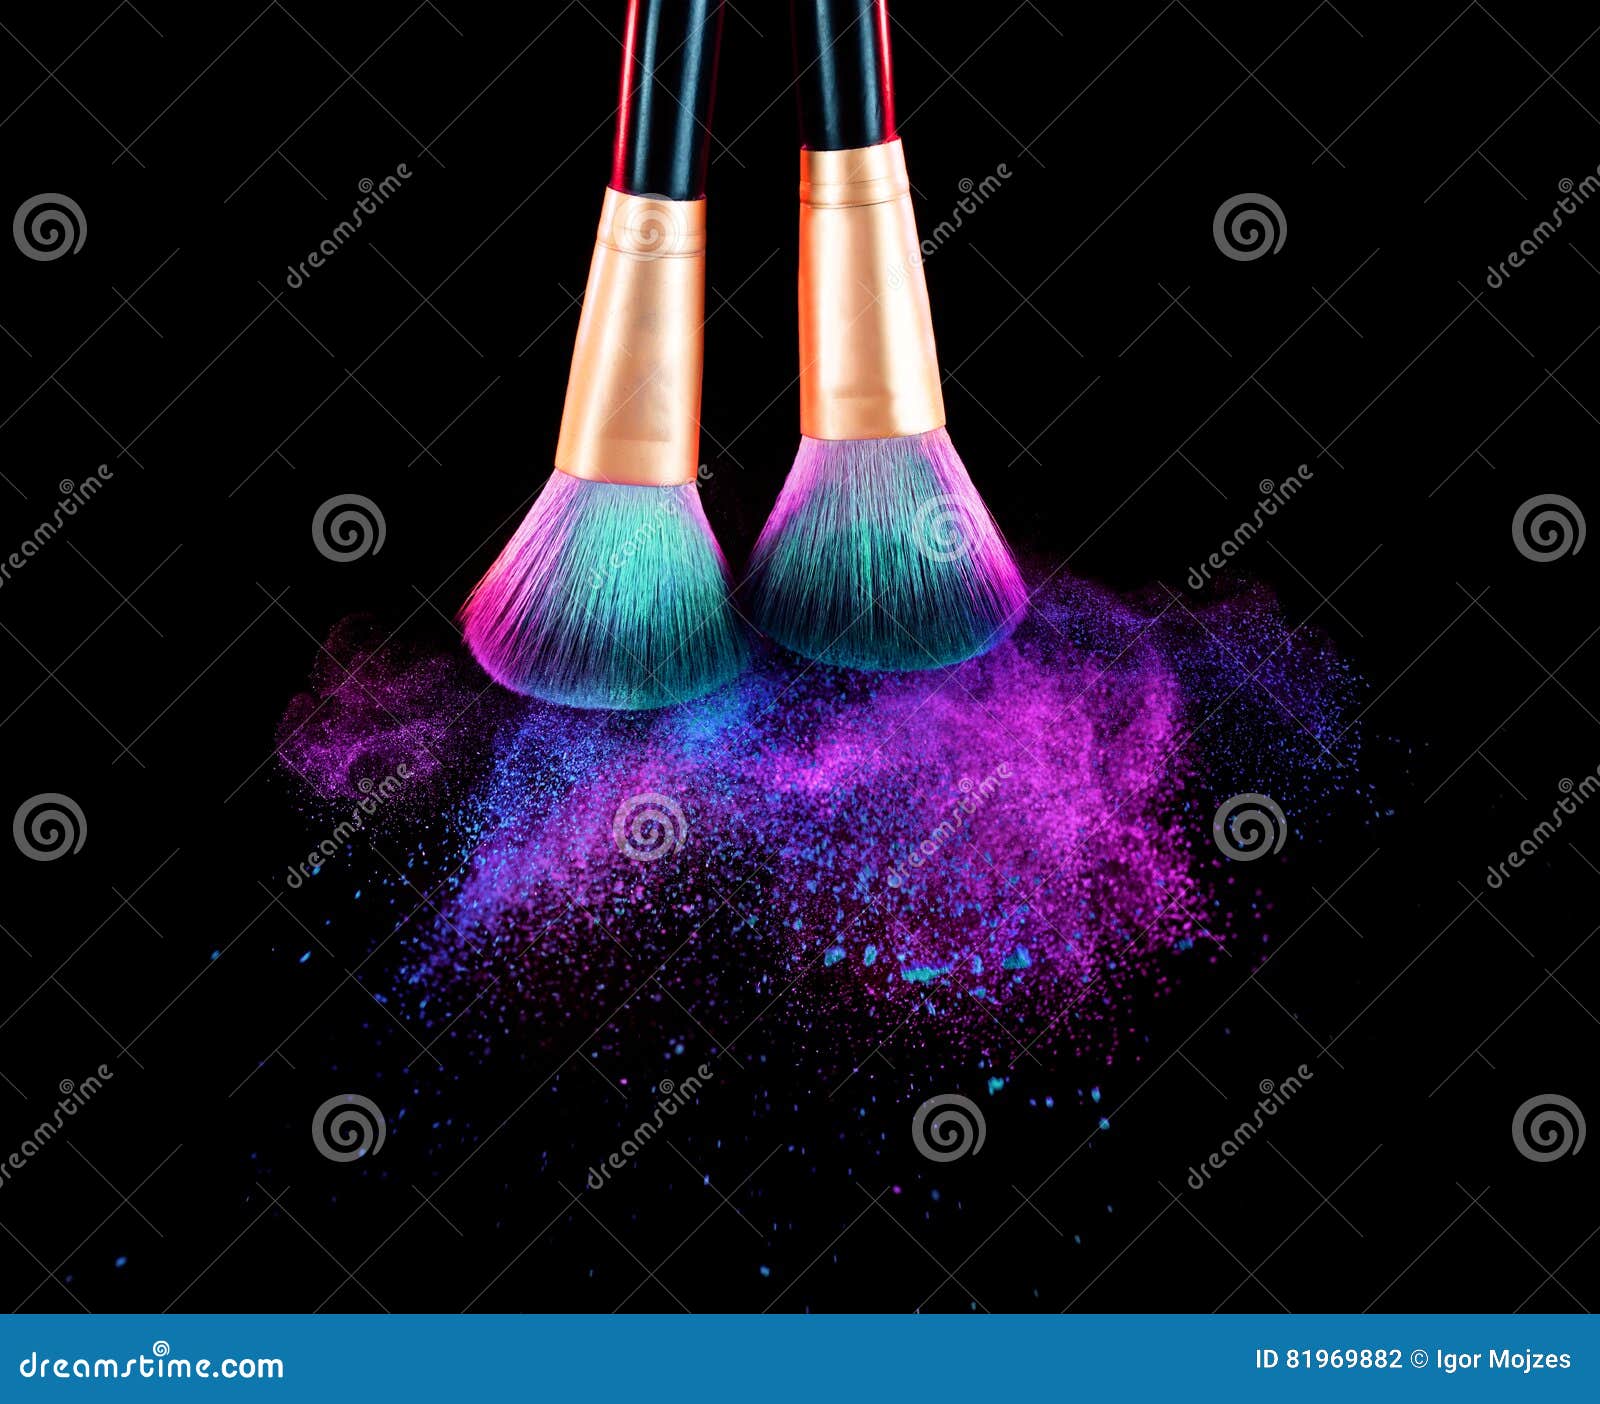 cosmetics brush and explosion makeup dust powder